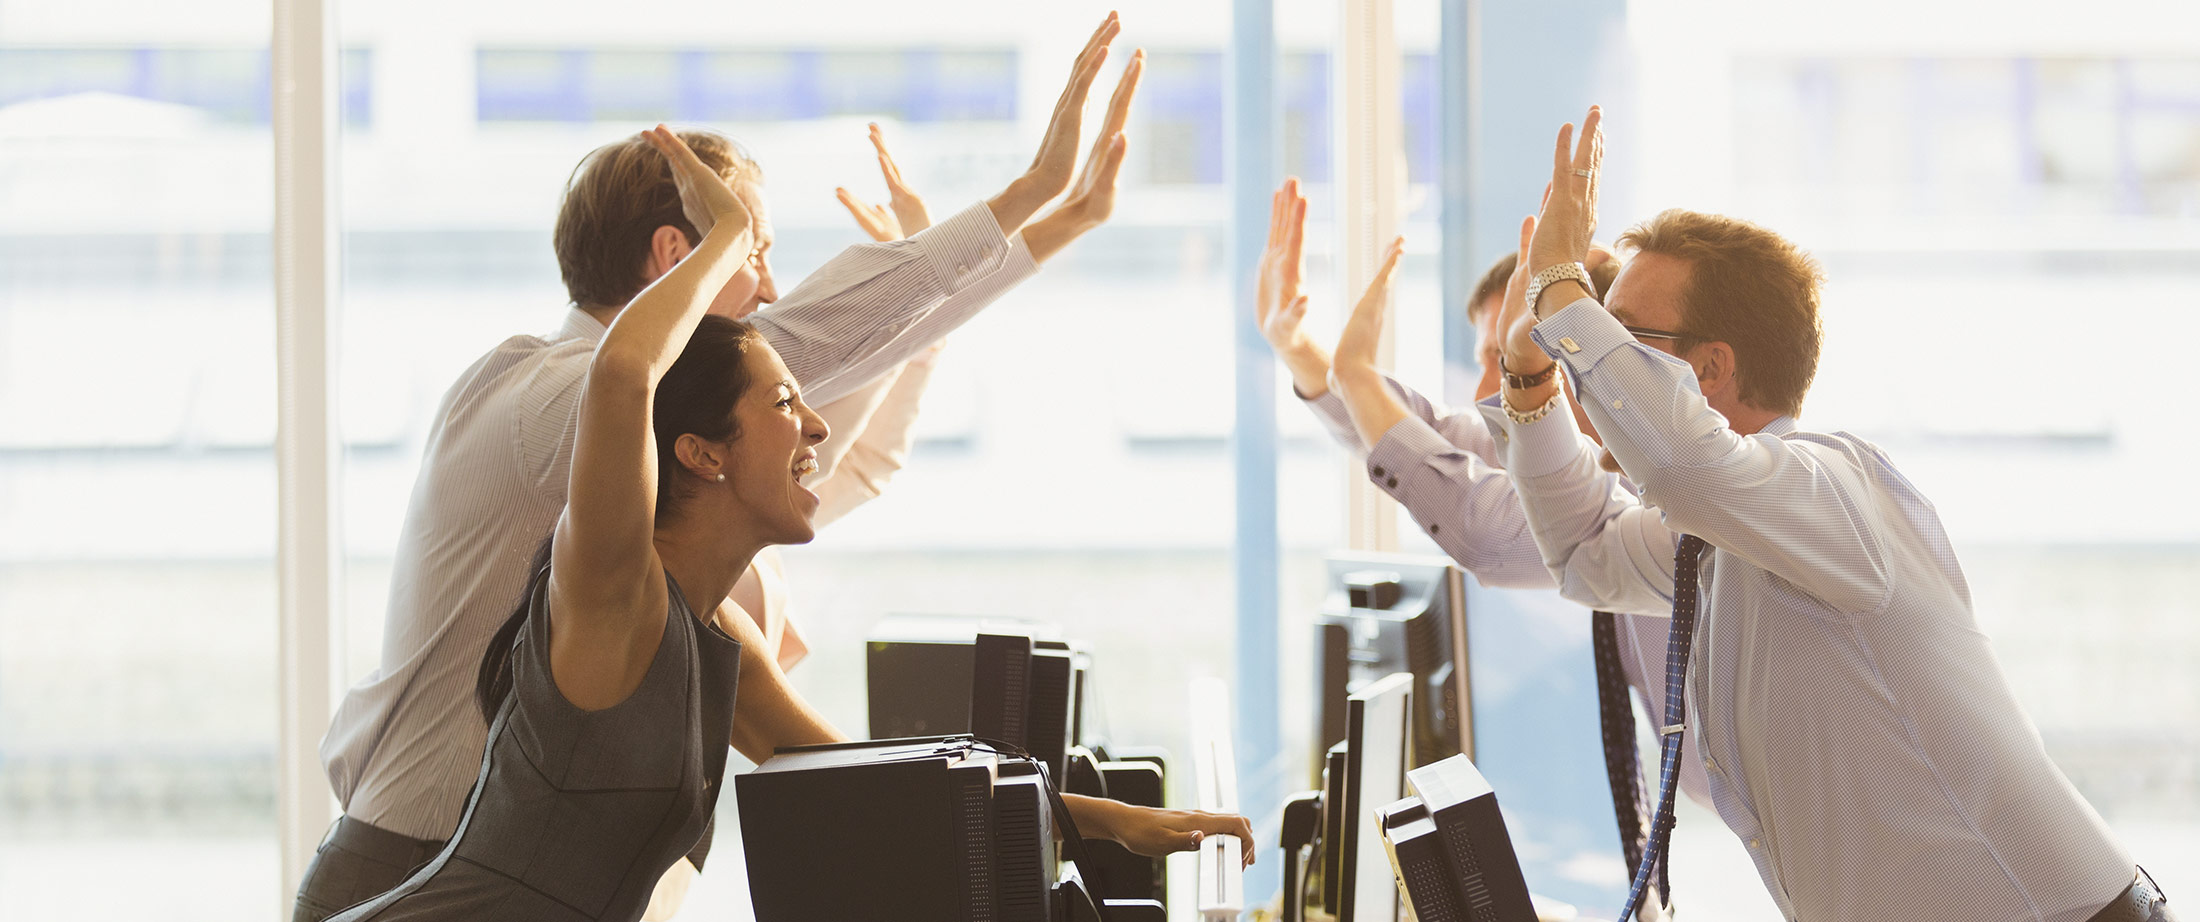 Exuberant business people high-fiving over computers in office